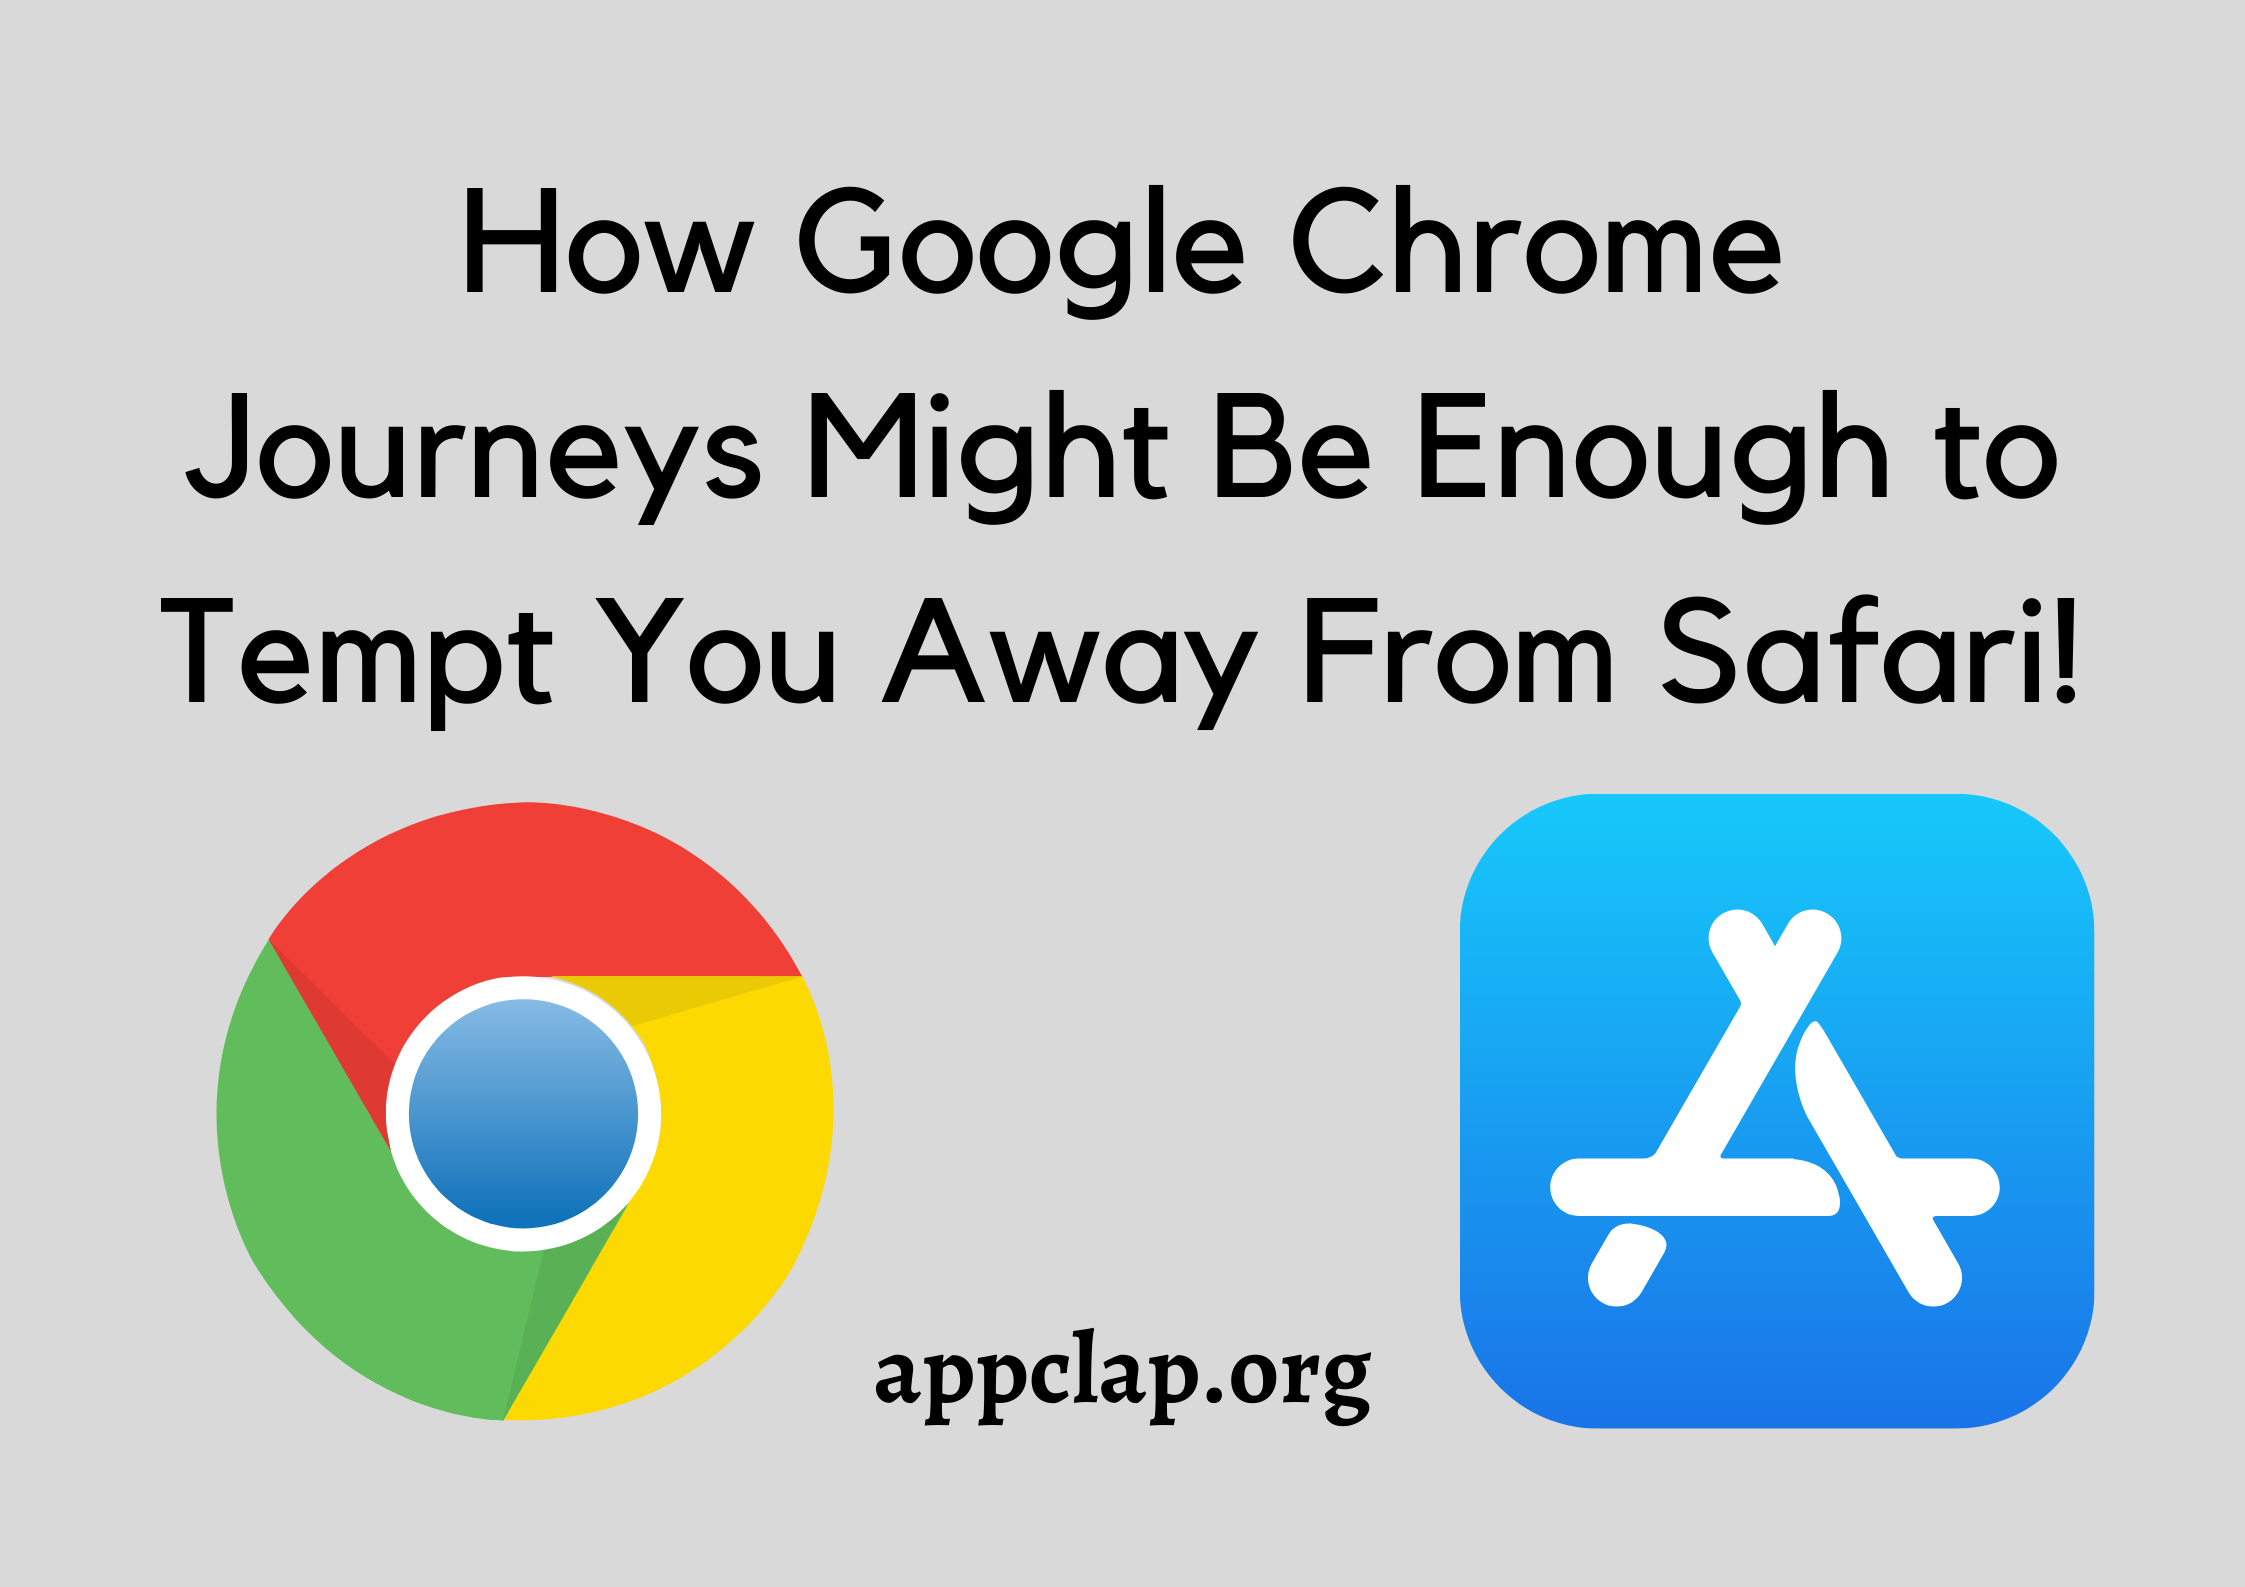 How Google Chrome Journeys Might Be Enough to Tempt You Away From Safari!